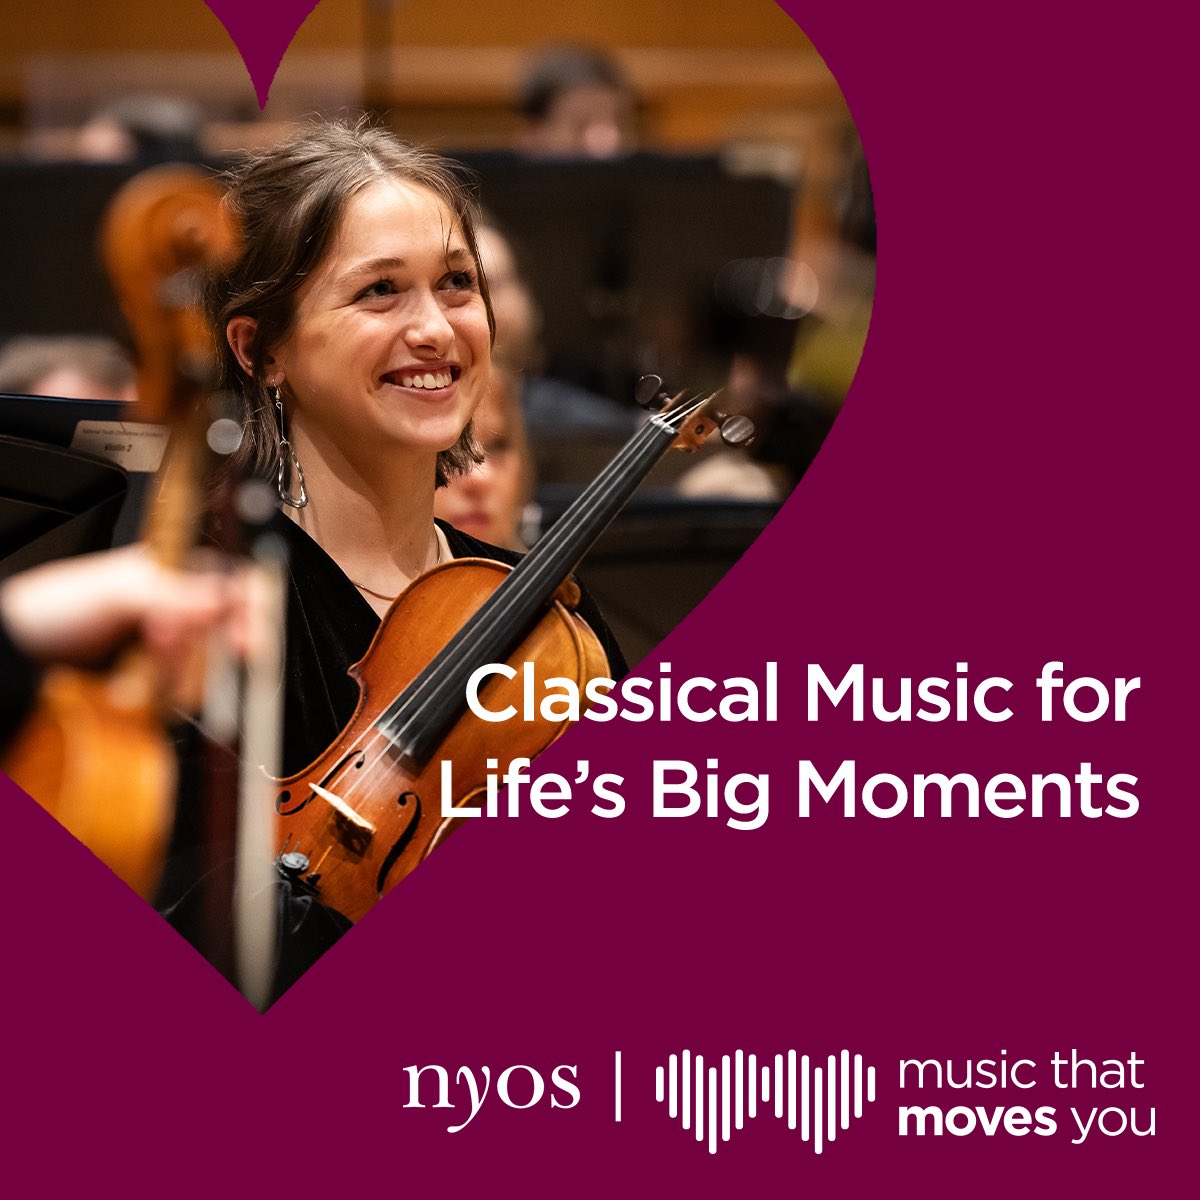 📣 We’re joining organisations across the country to celebrate the incredible power of classical music! 🎻🎶 NYOS are supporting the launch of an exciting new campaign from @aborchestras which aims to showcase the value of music-makers and the #musicthatmovesyou 👏🏽